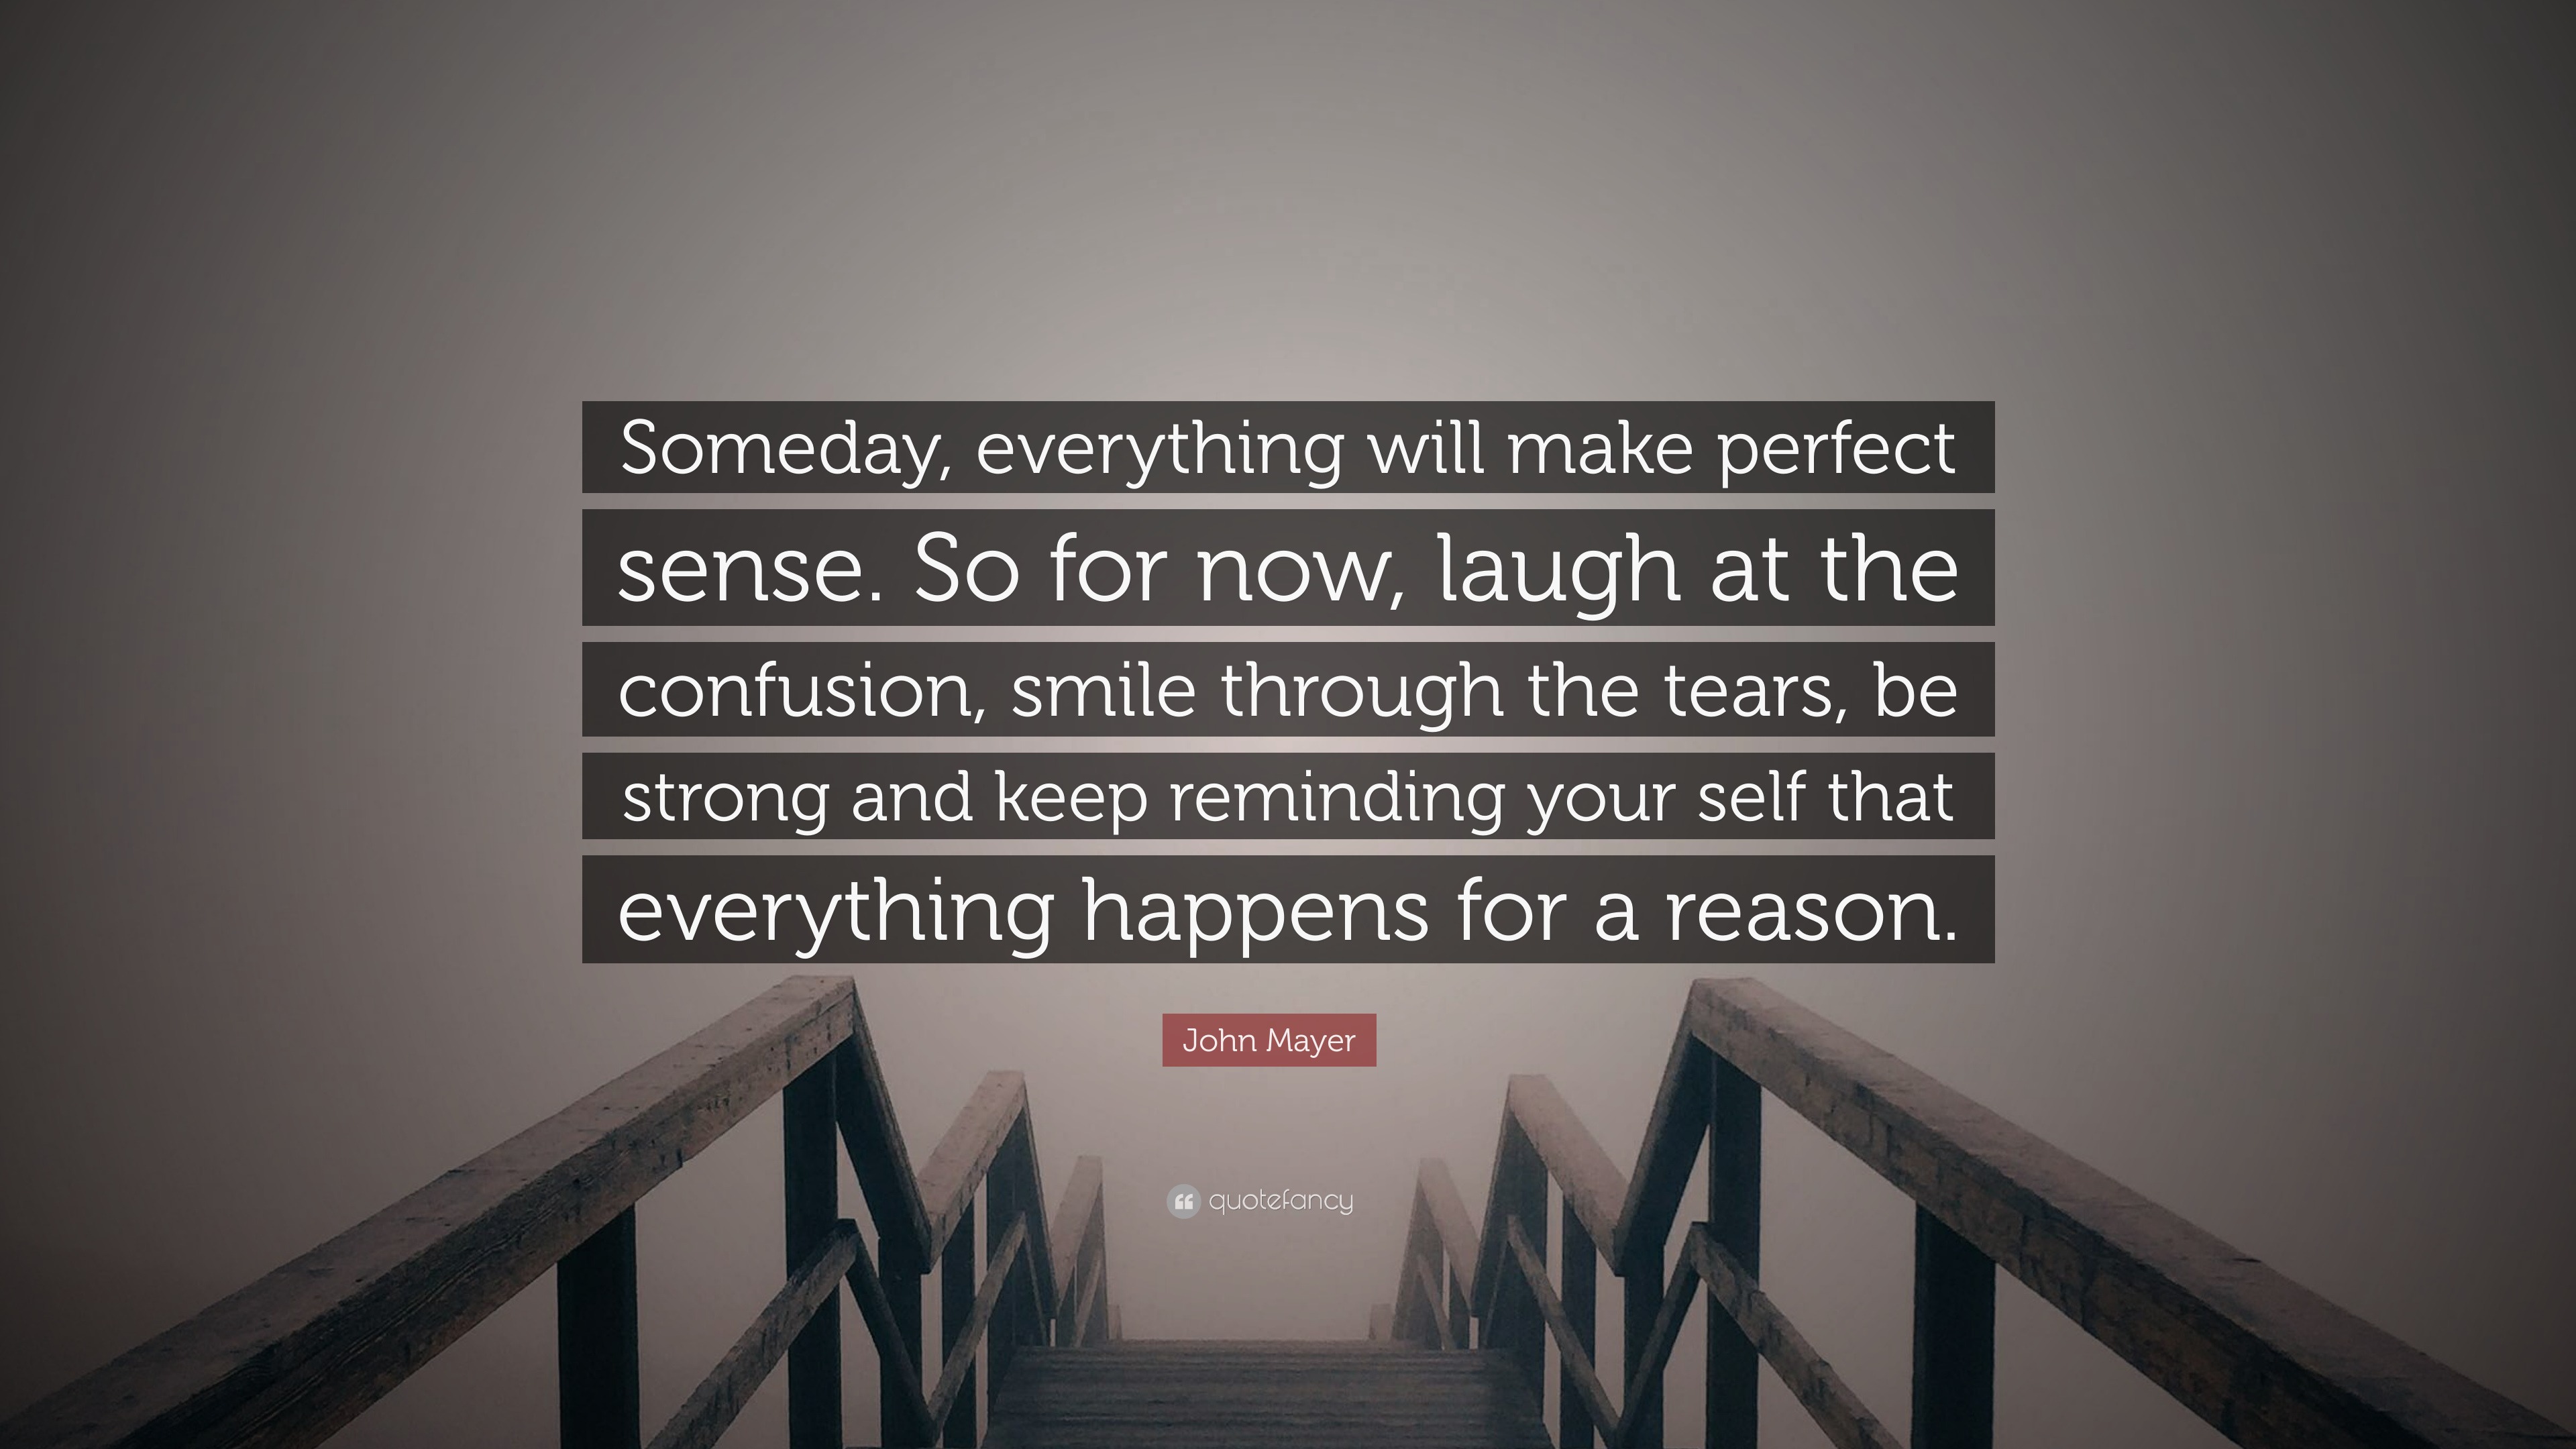 John Mayer Quote Someday Everything Will Make Perfect Sense So